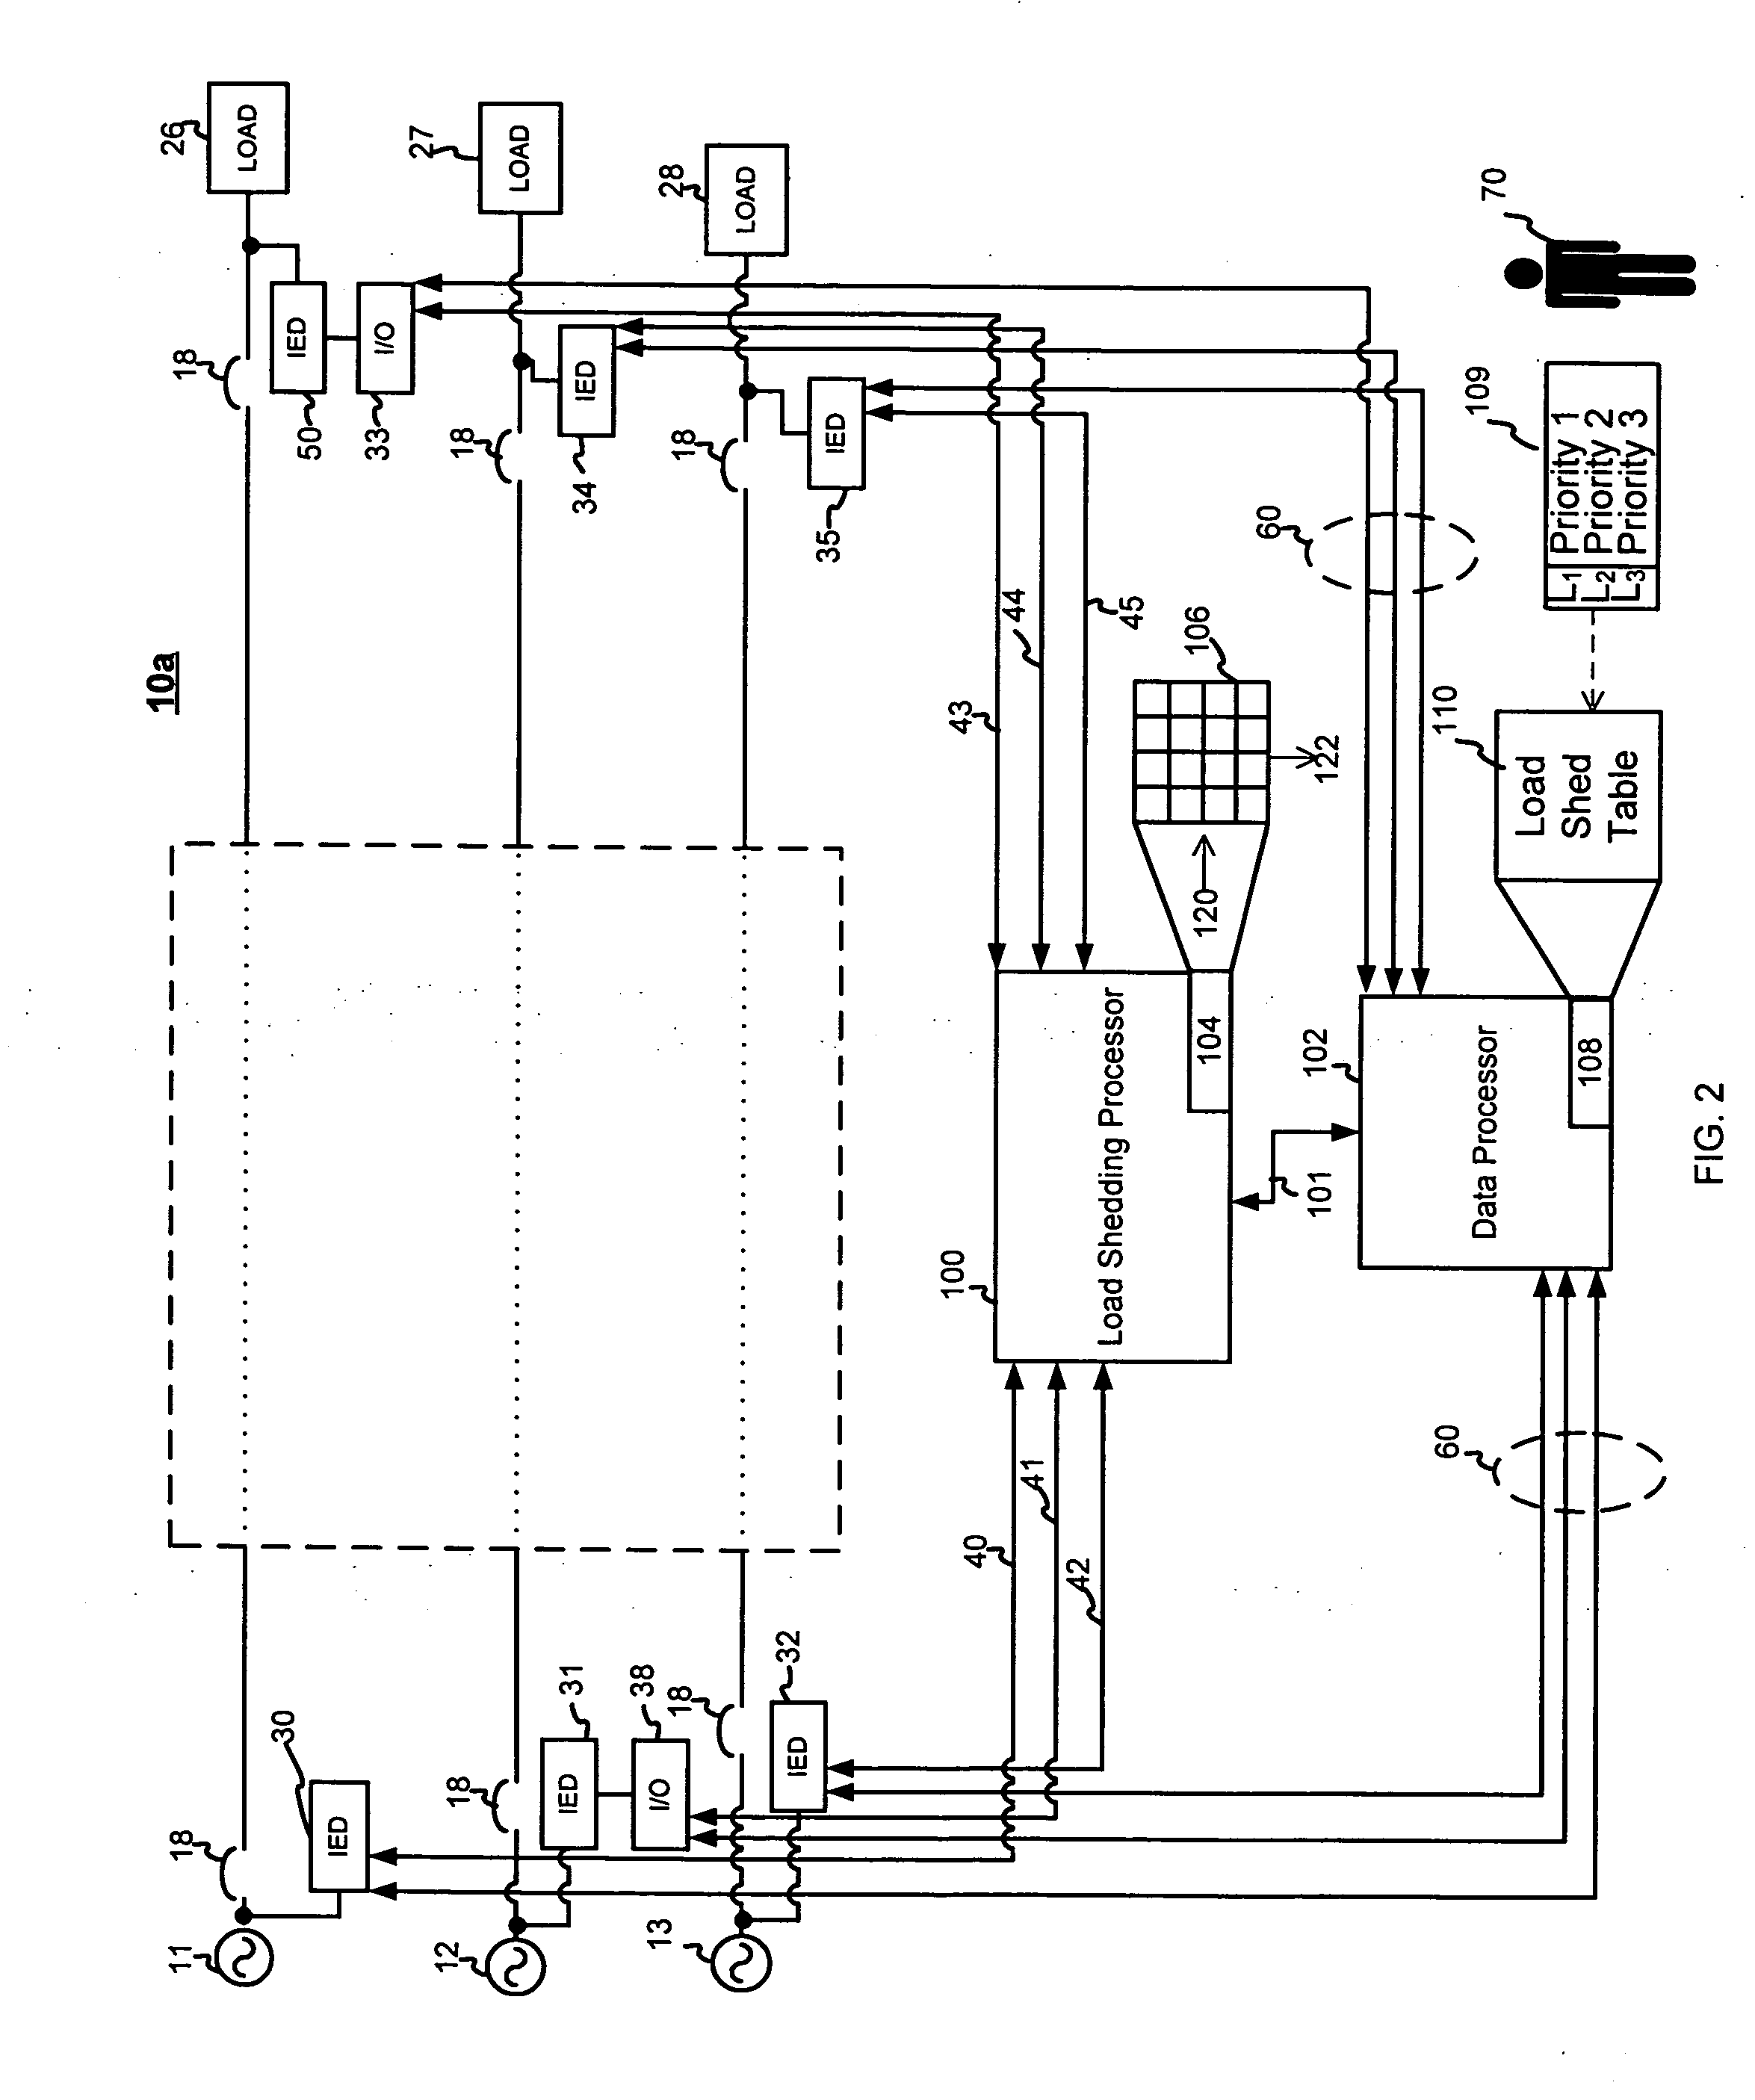 Apparatus and method for high-speed load shedding in an electrical power system